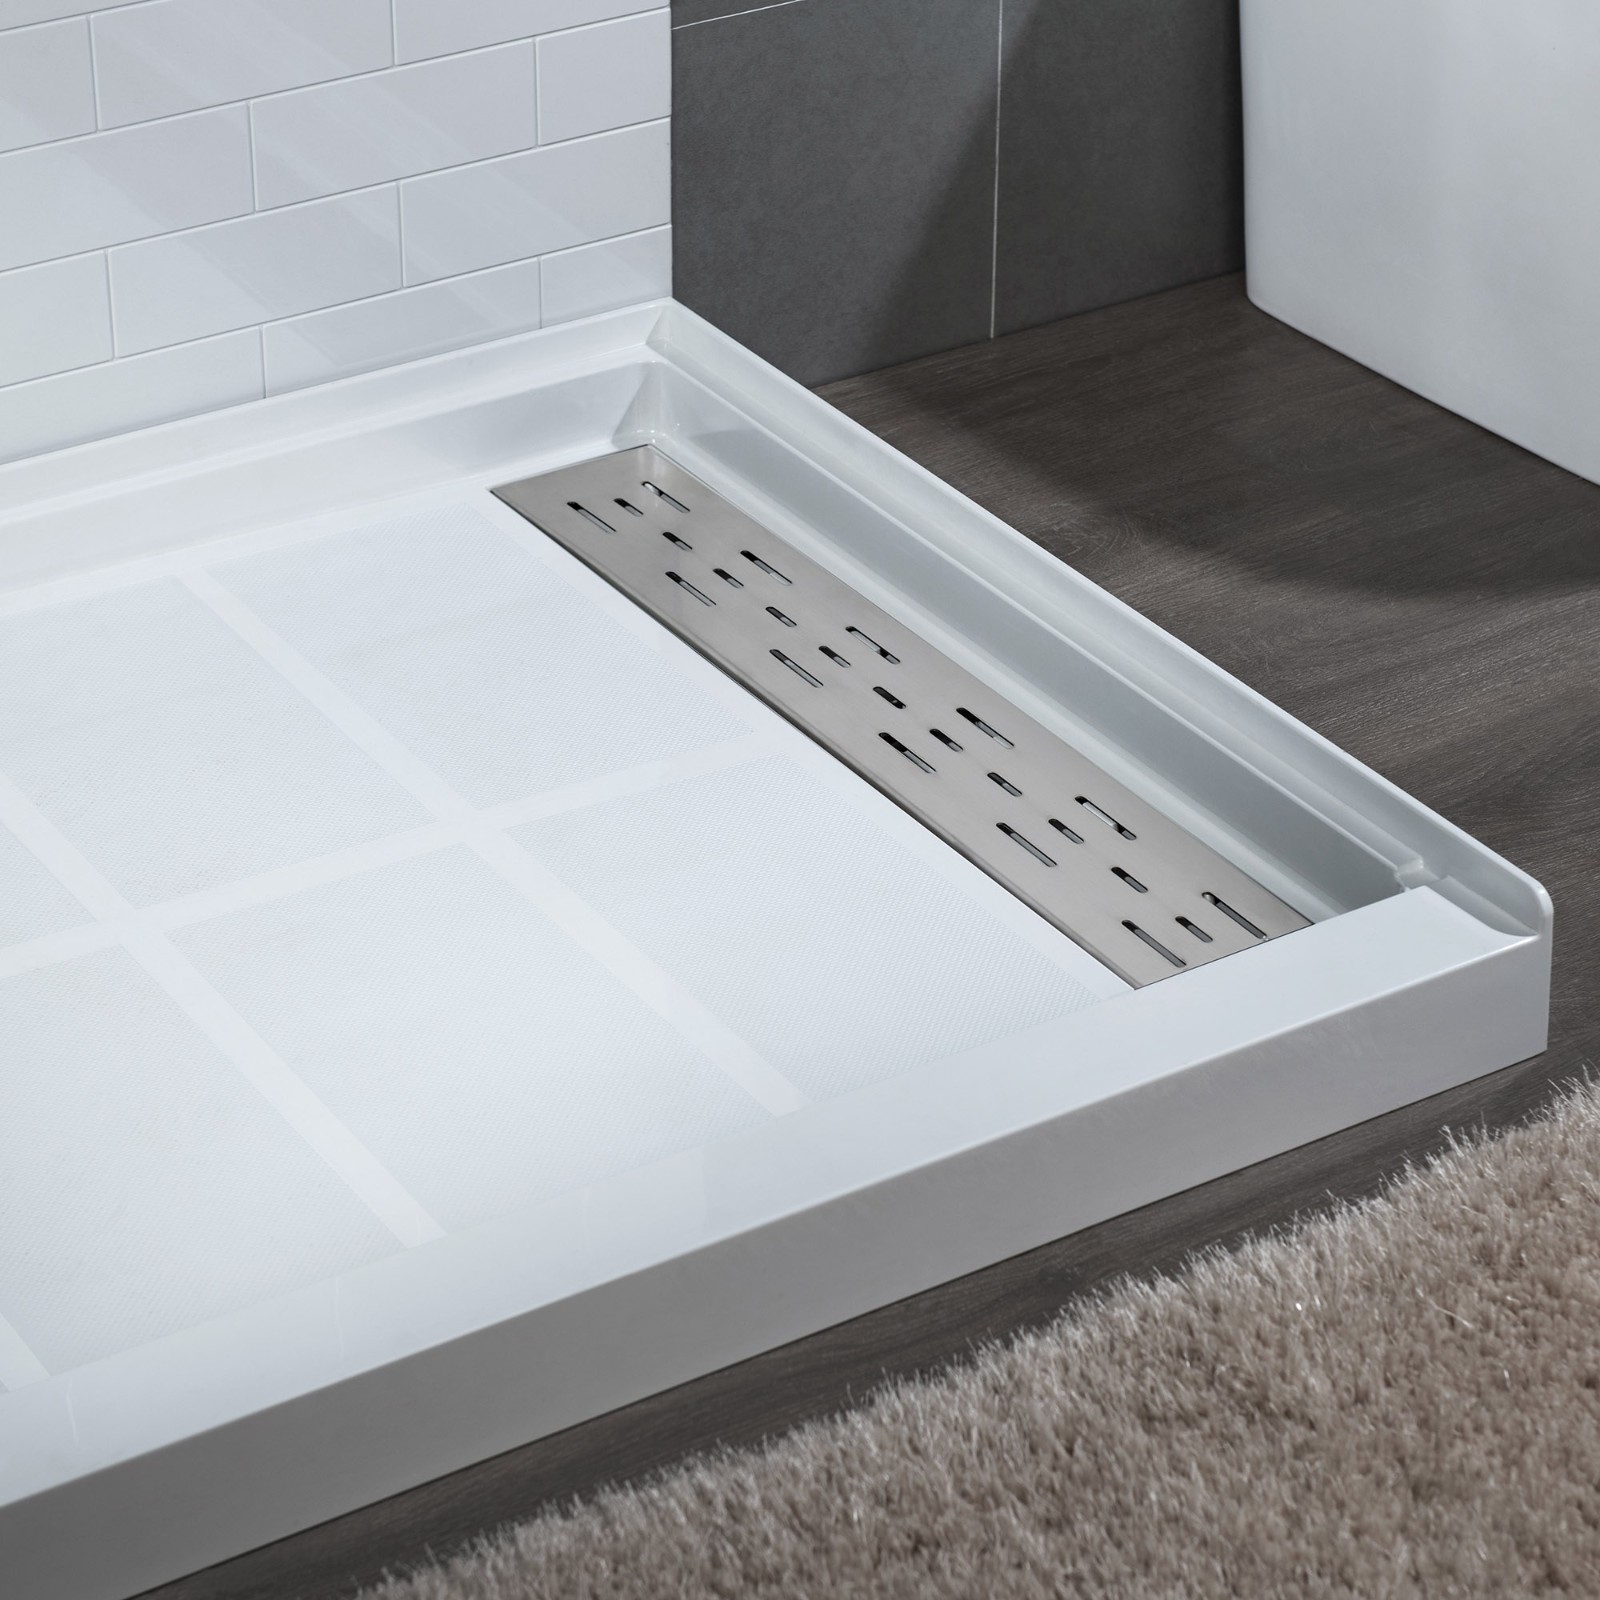  WOODBRIDGE SBR4836-1000R Solid Surface Shower Base with Recessed Trench Side Including Stainless Steel Linear Cover, 48